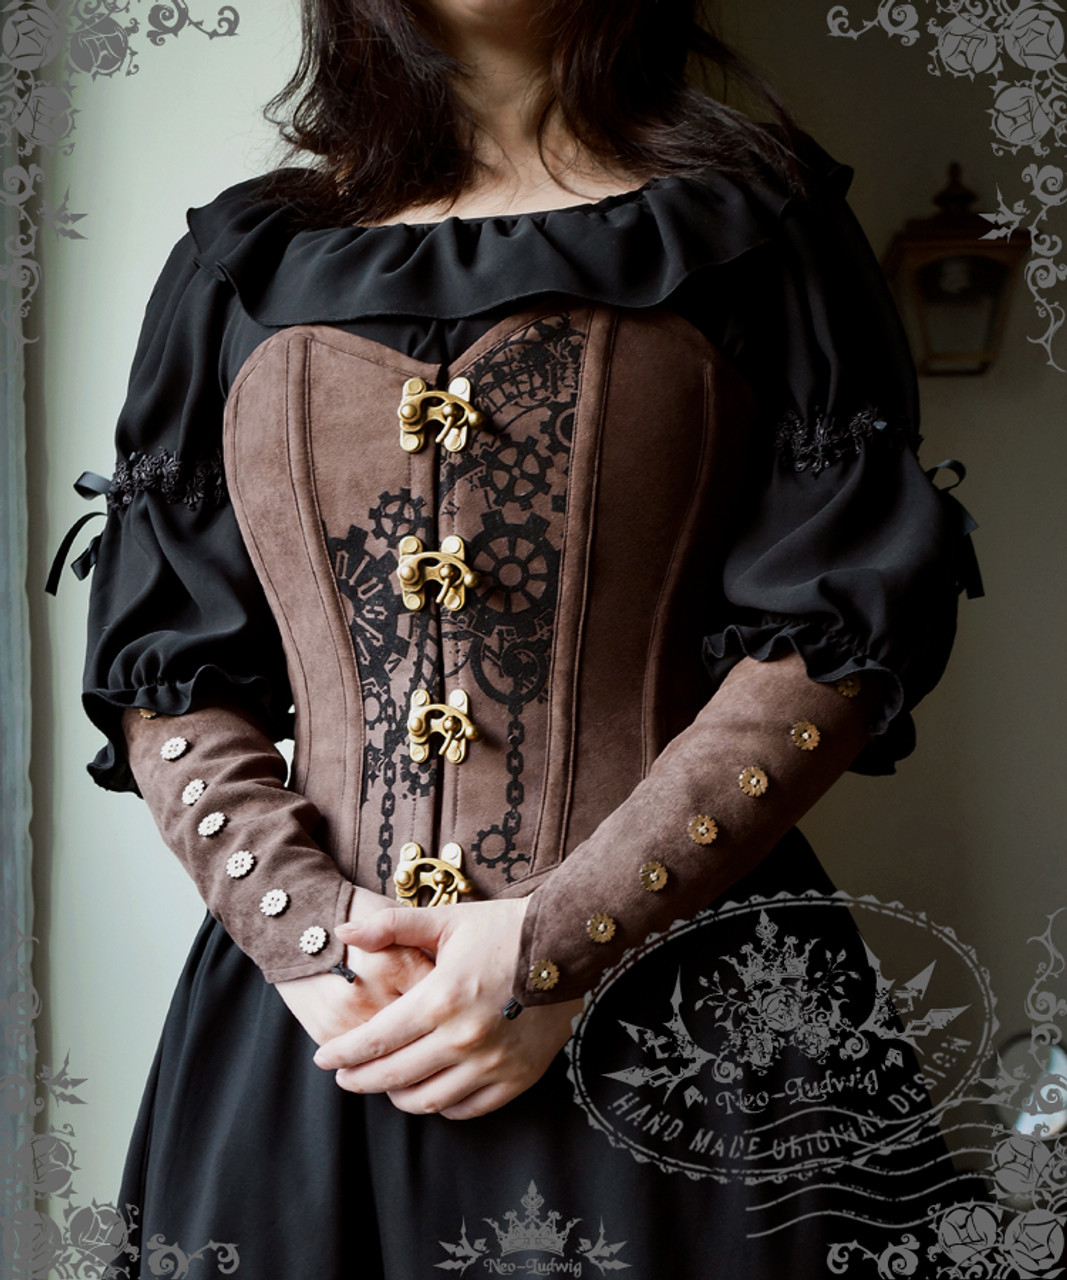 Have A Look at the Designs Of Our Steampunk Corset & Overbust Corsets